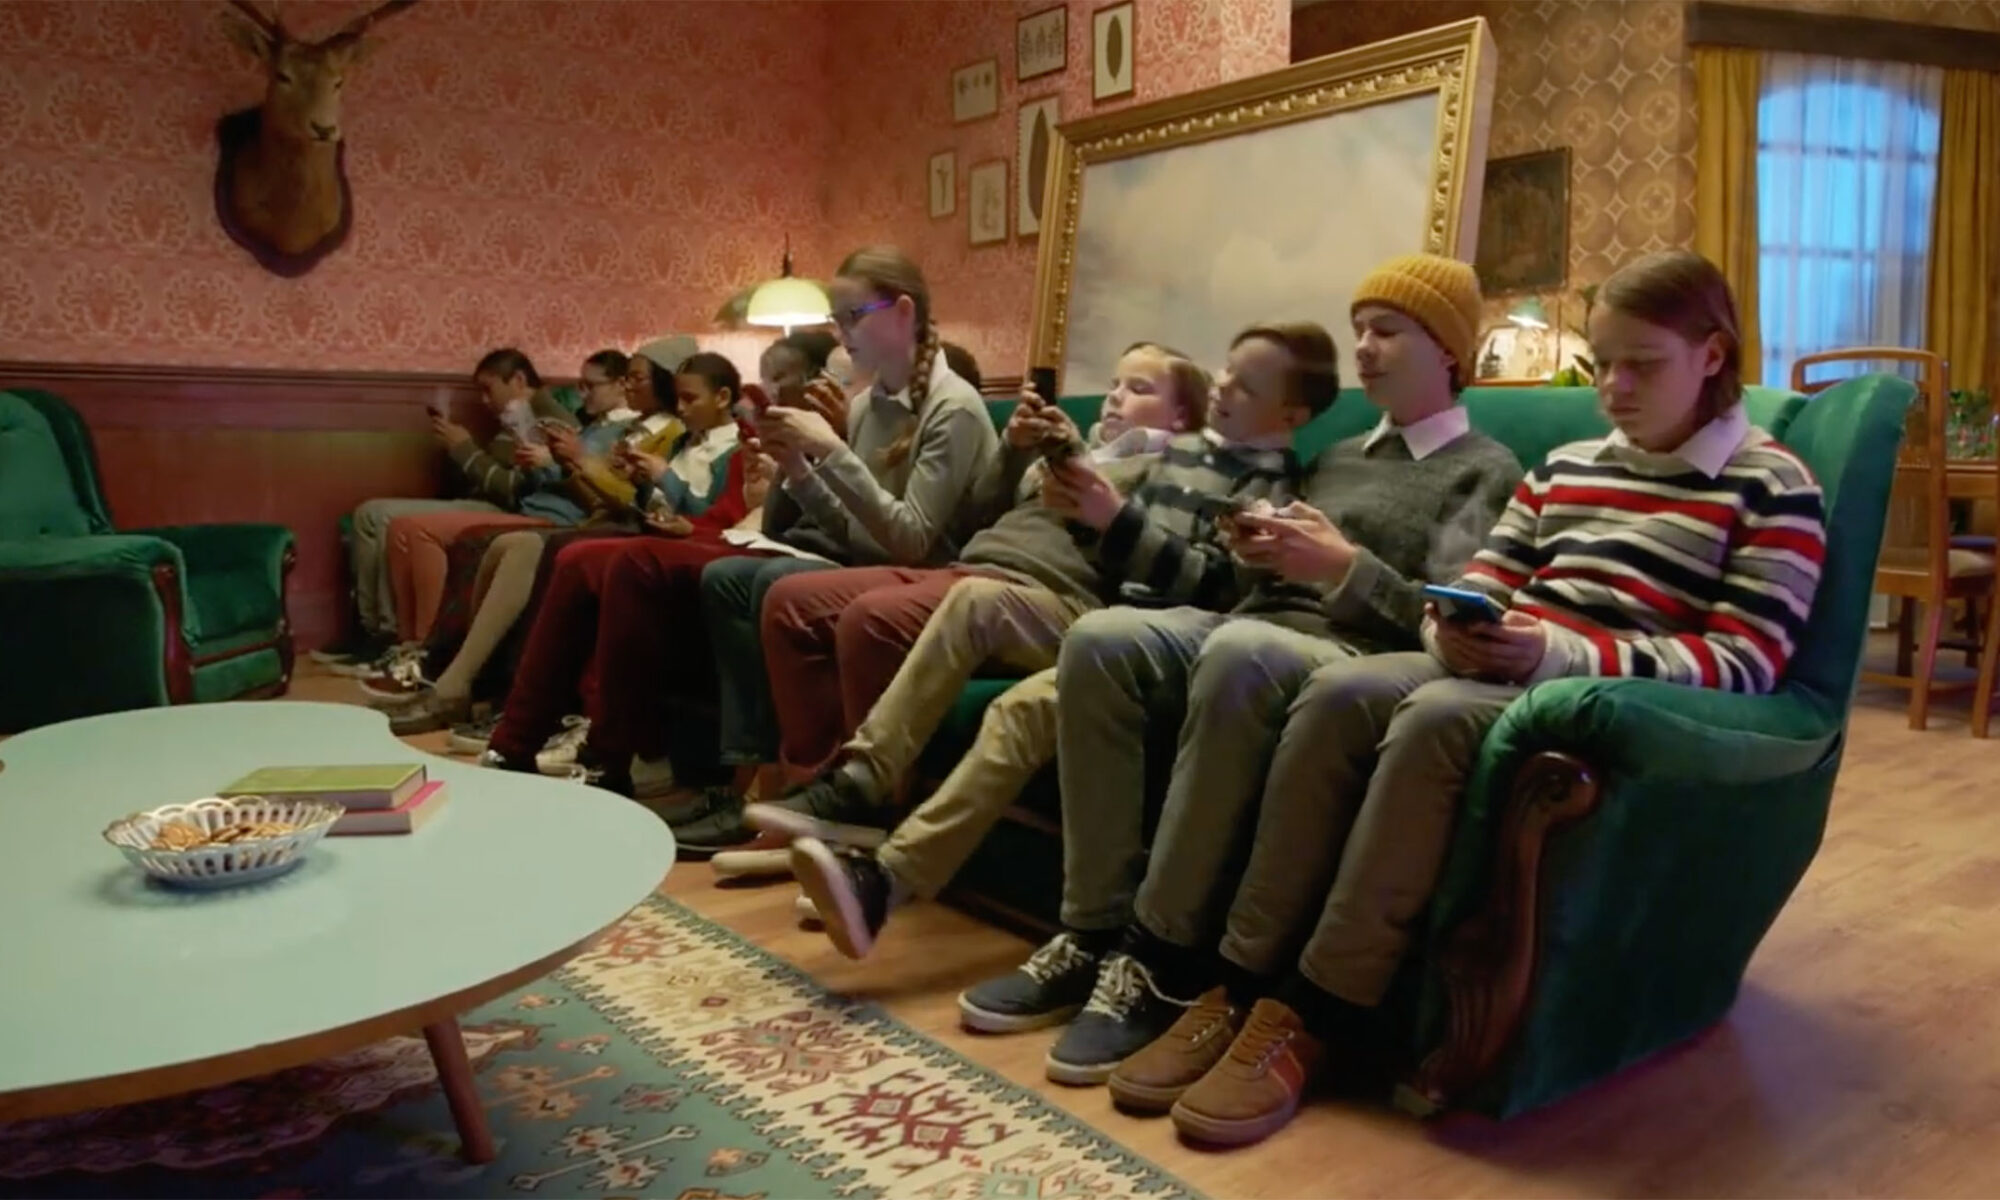 HP 12 Teens a Texting in 12 Days of Real Christmas ad